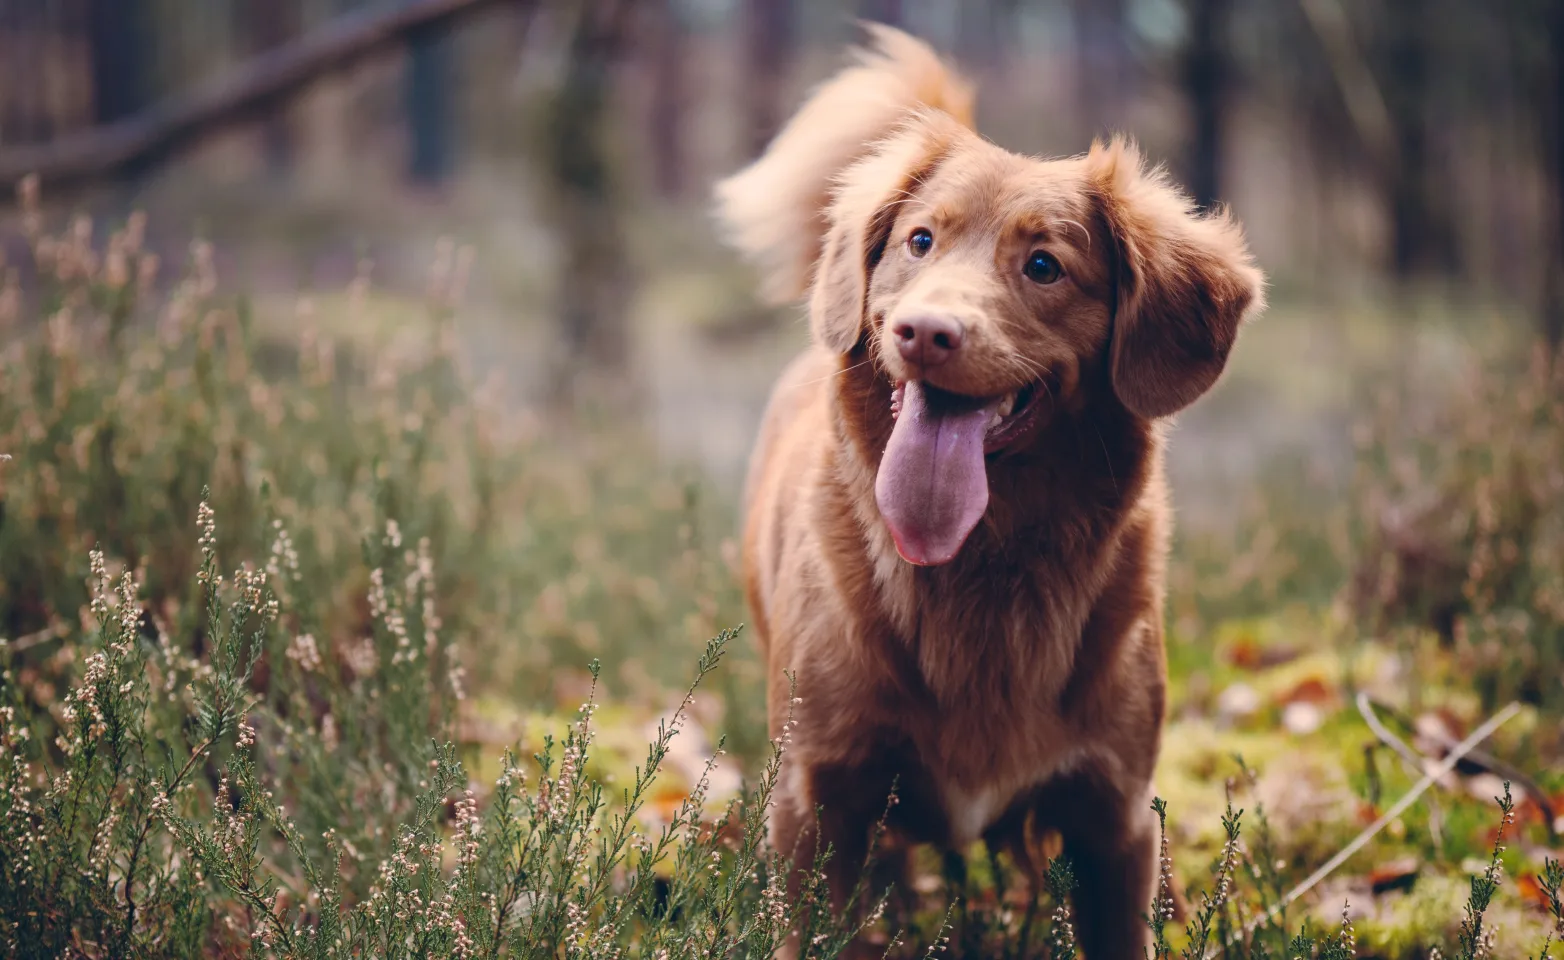 Dog standing in grassy area with tongue out